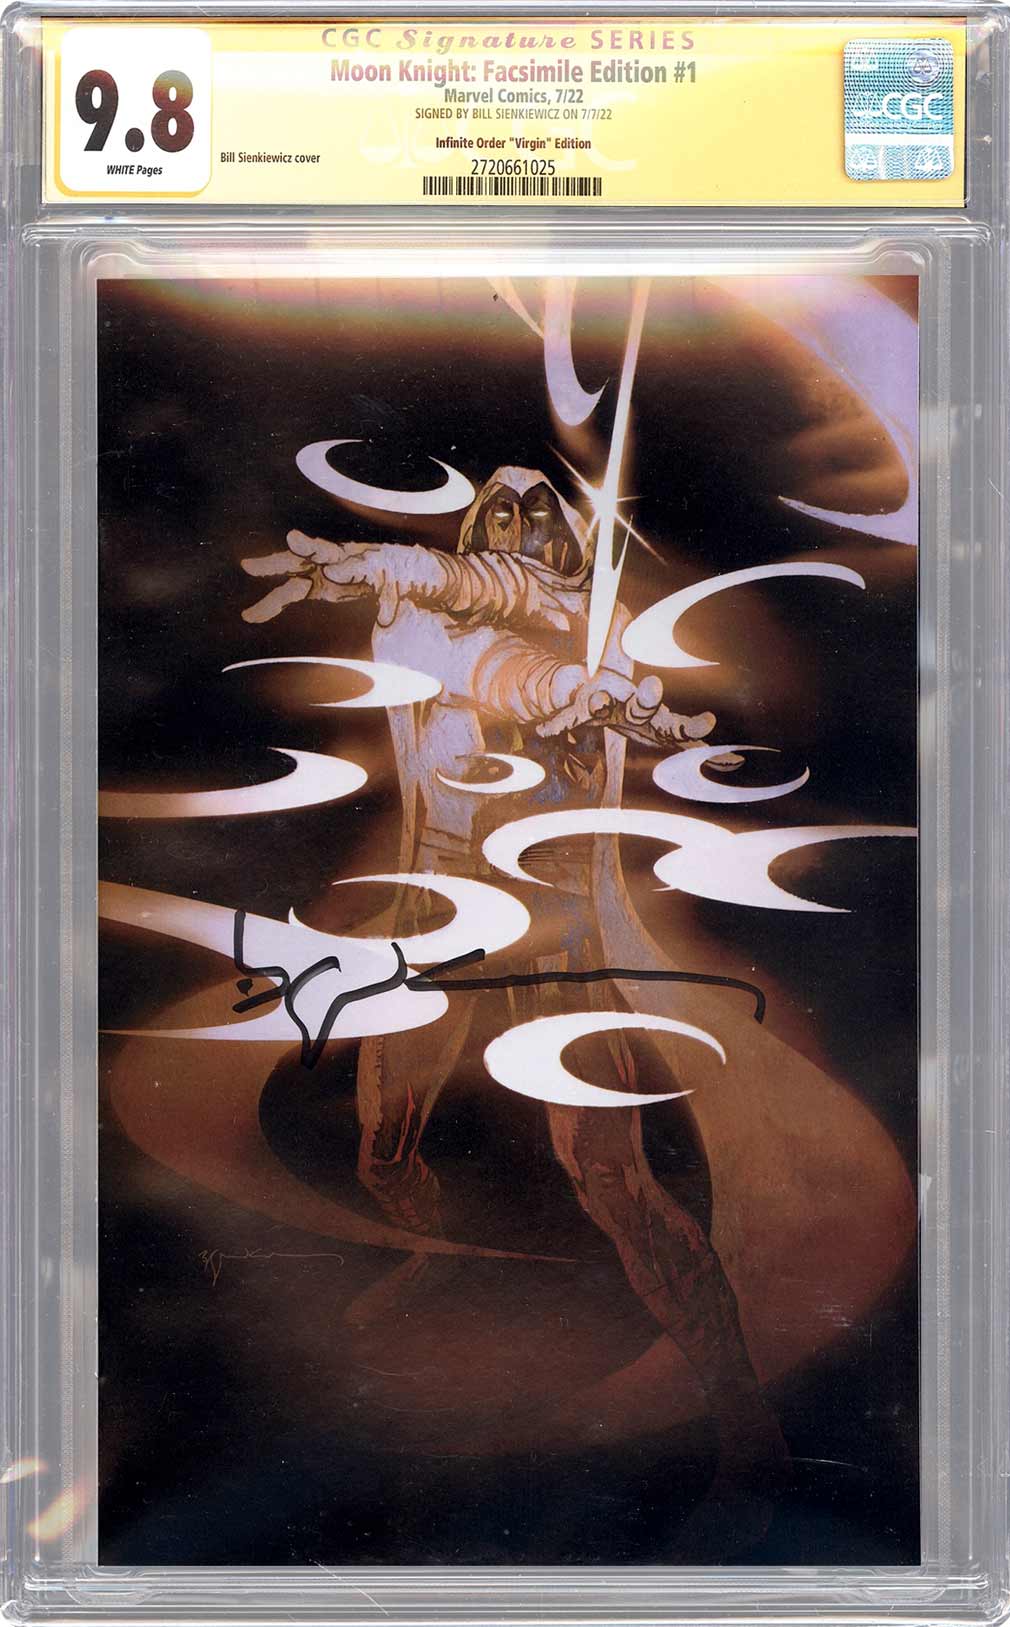 Moon Knight #1 Facsimile CGC SS 9.8 Signed by Bill Sienkiewicz